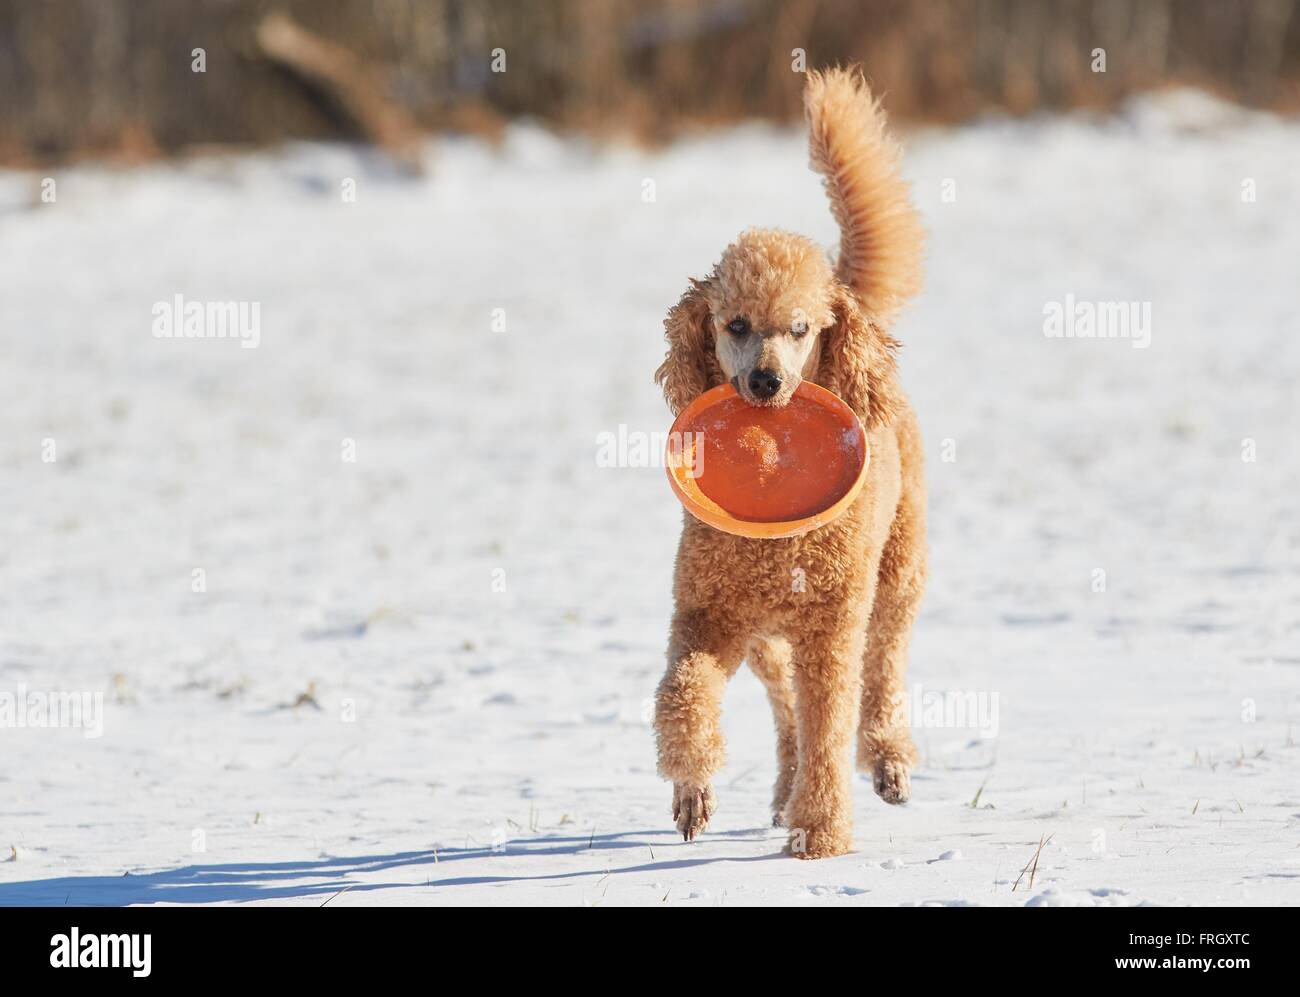 Playful poodle playing with a toy in winter. Stock Photo